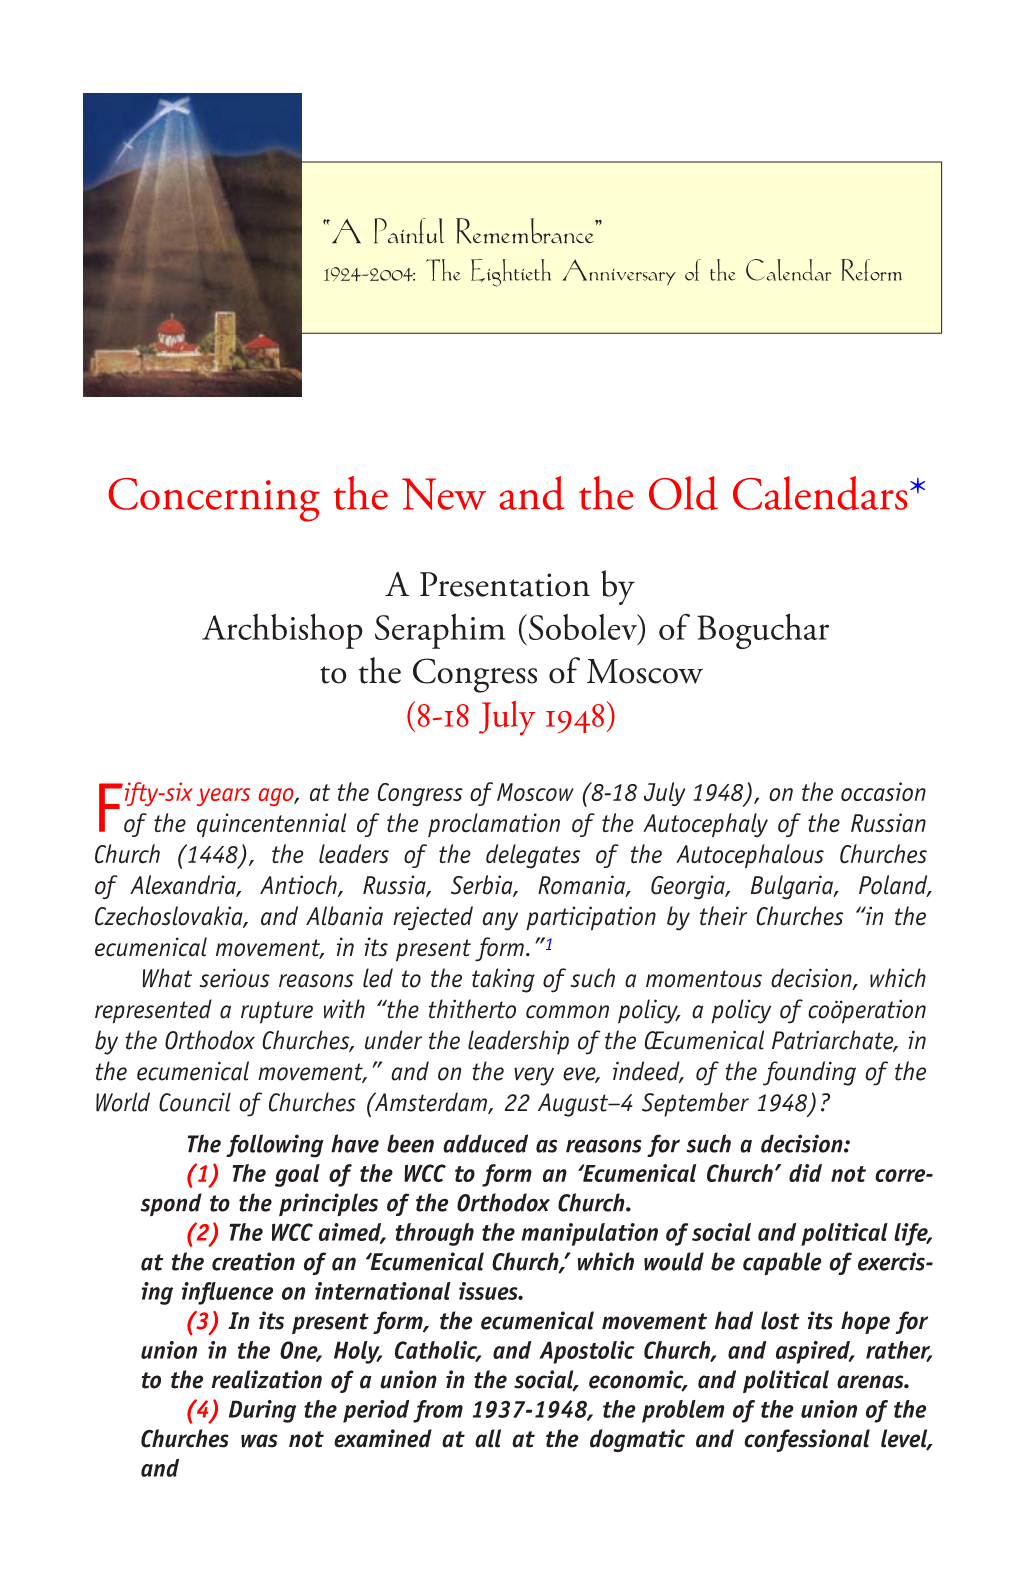 'Concerning the New and the Old Calendars': a Presentation by St